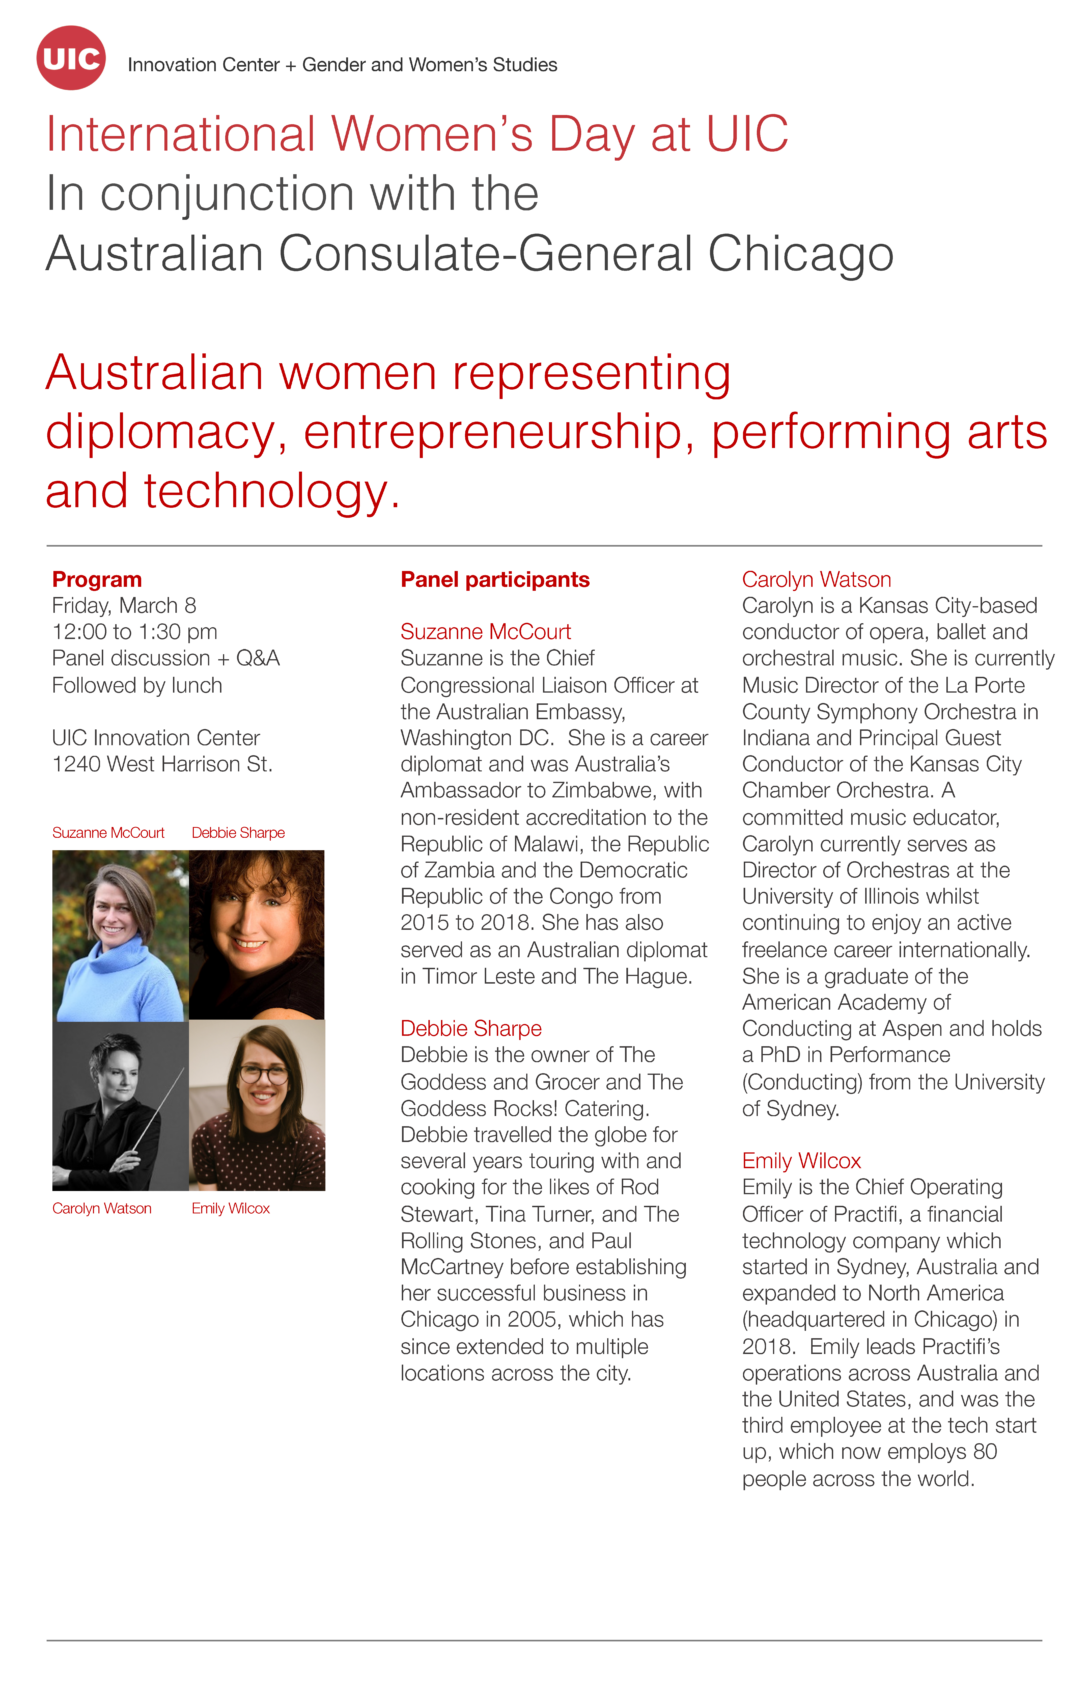 Event flyer on white background. Event title, date and location, and speaker bios are listed in red and black font. Halfway down the left side of the page is are four square images of each panelist, arranged in a square formation.